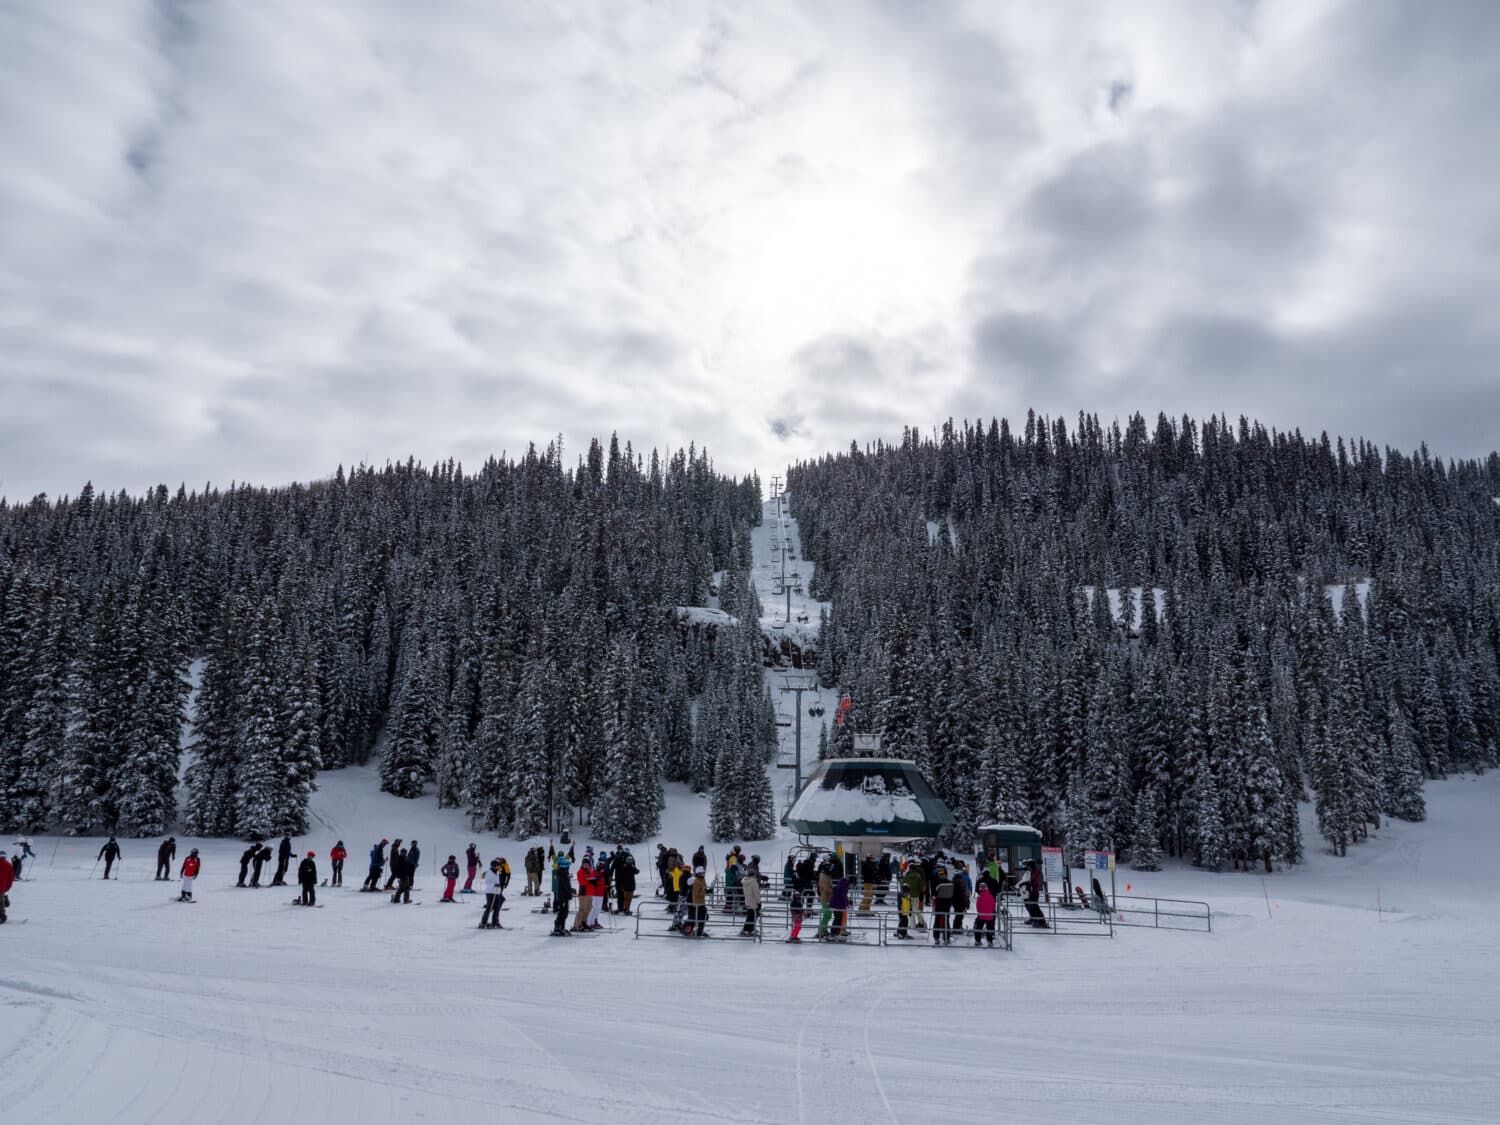 Read more: When is The Best Time to Ski?